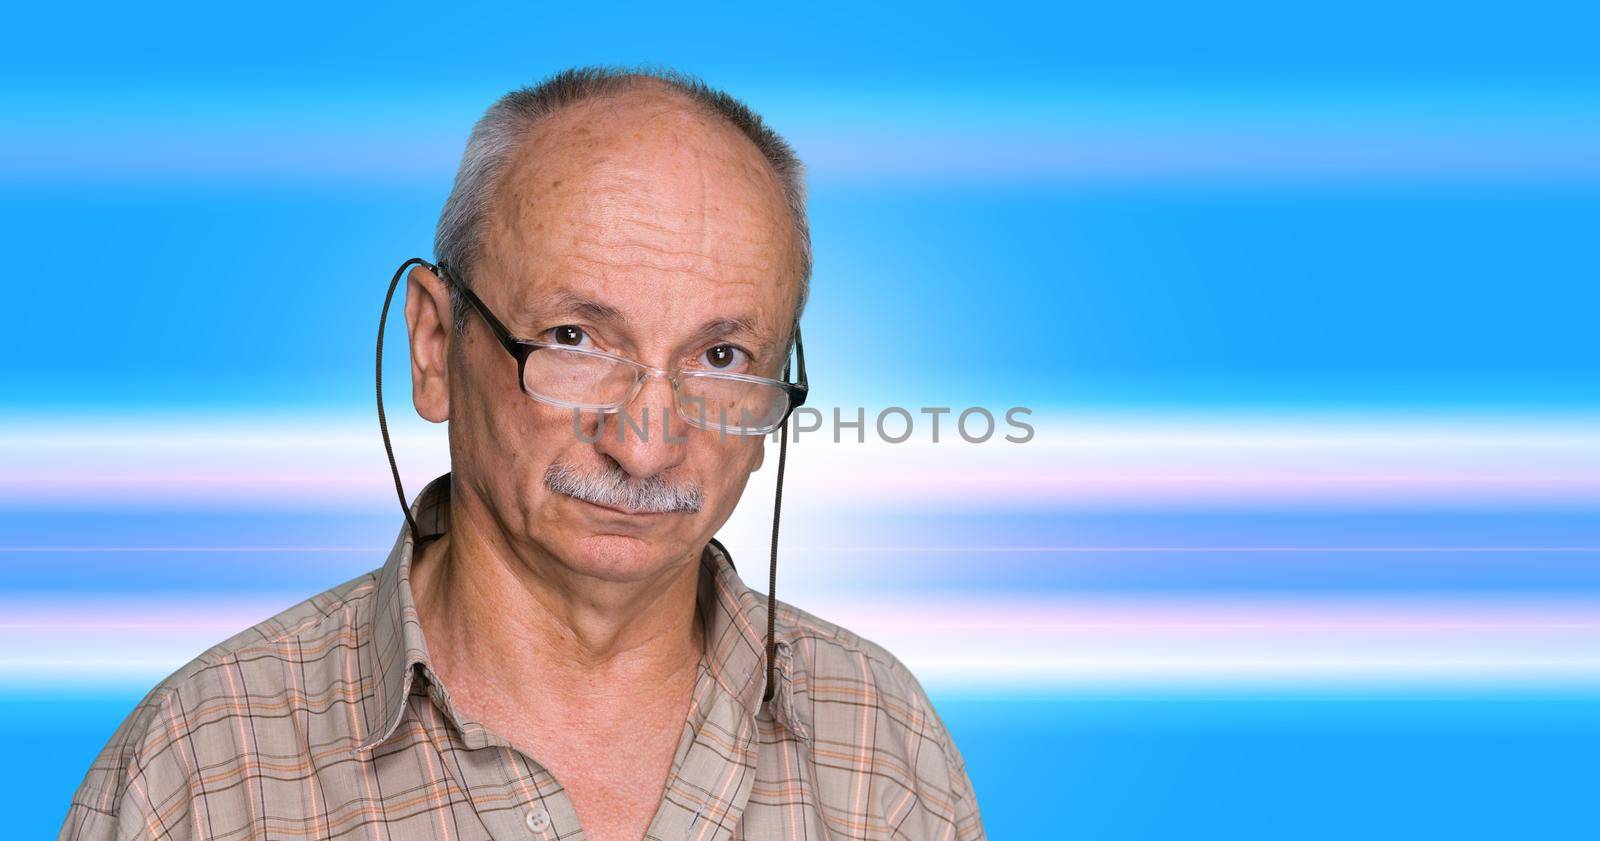 An elderly man with glasses on a blue abstract background